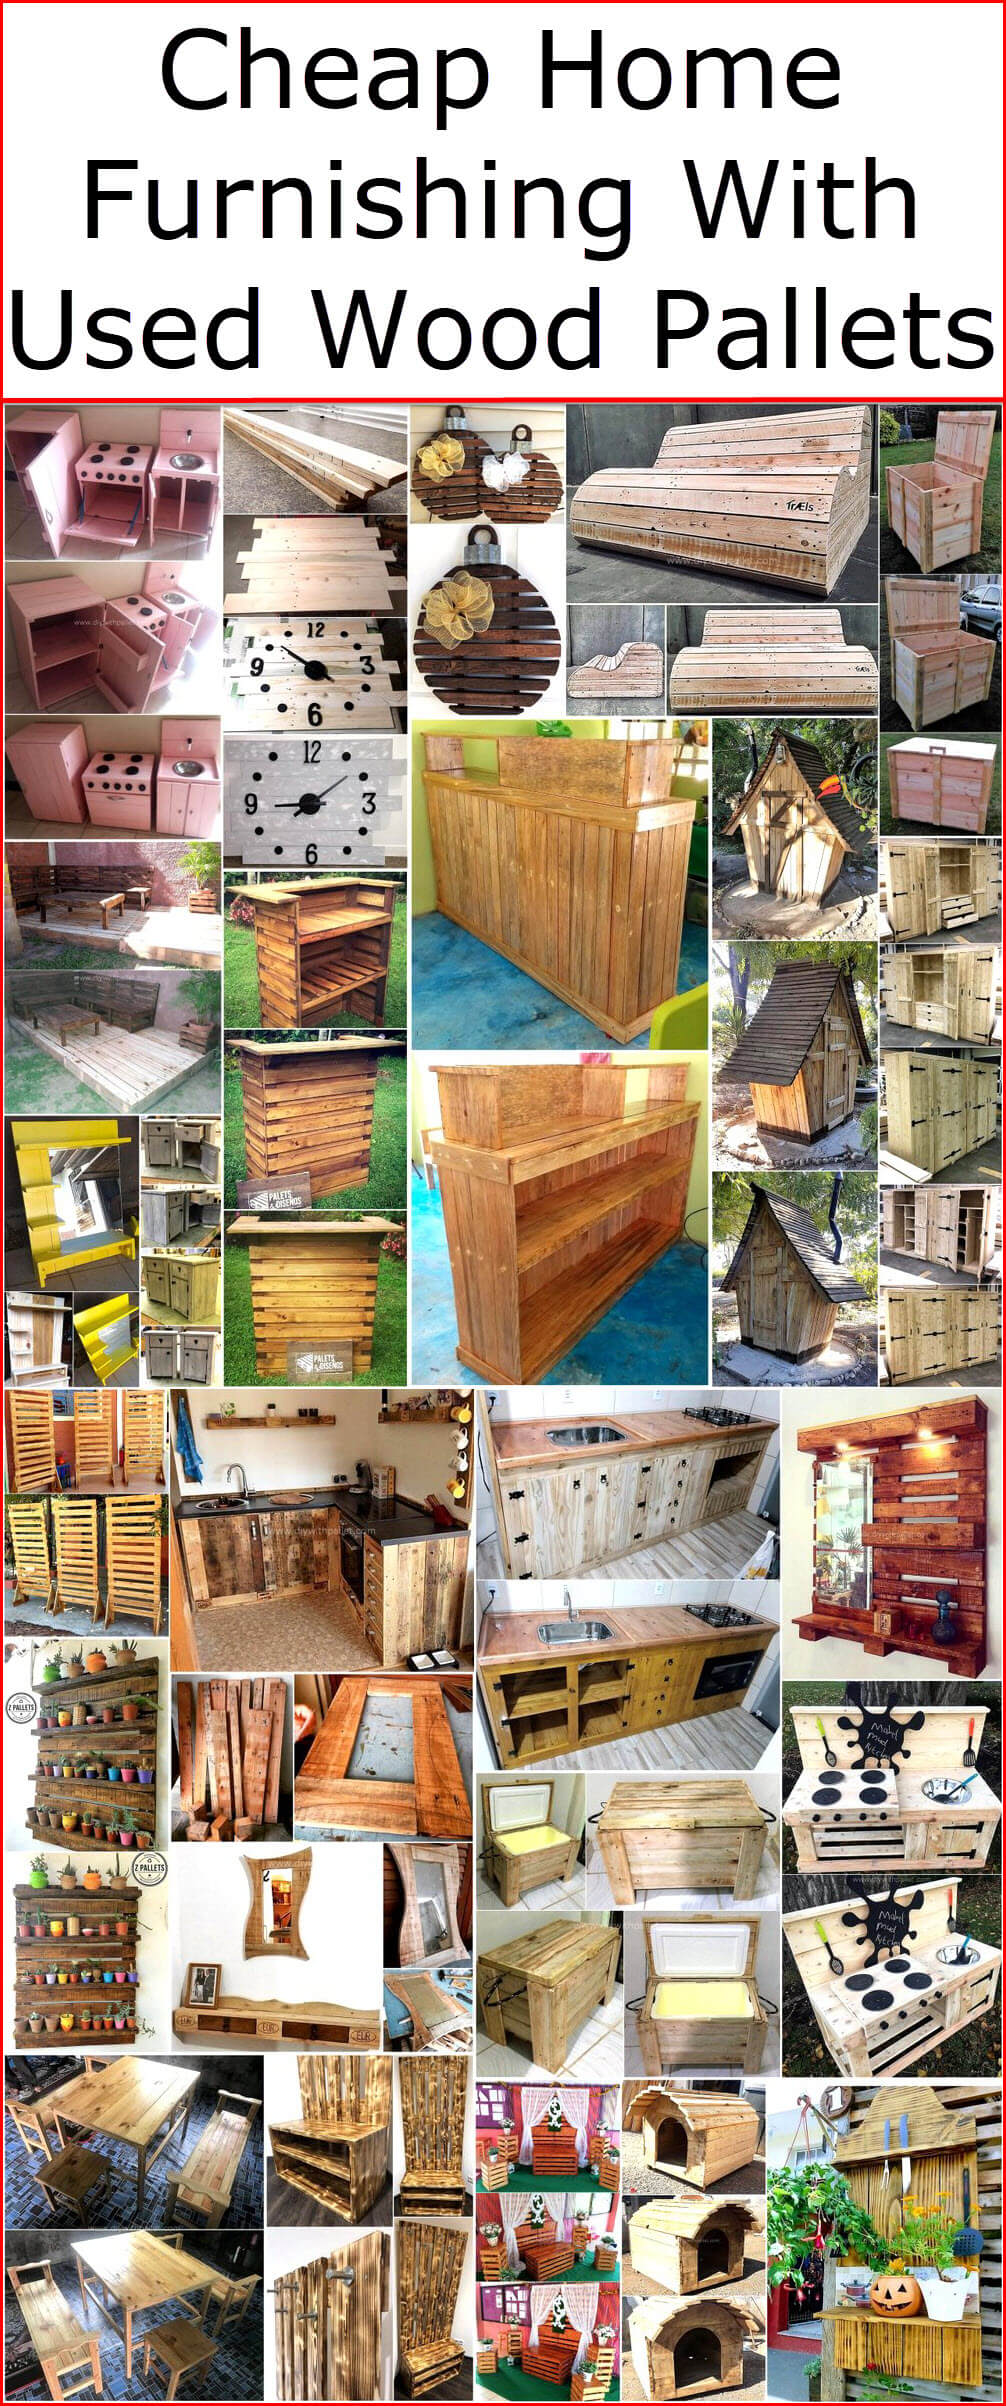 Cheap Home Furnishing With Used Wood Pallets